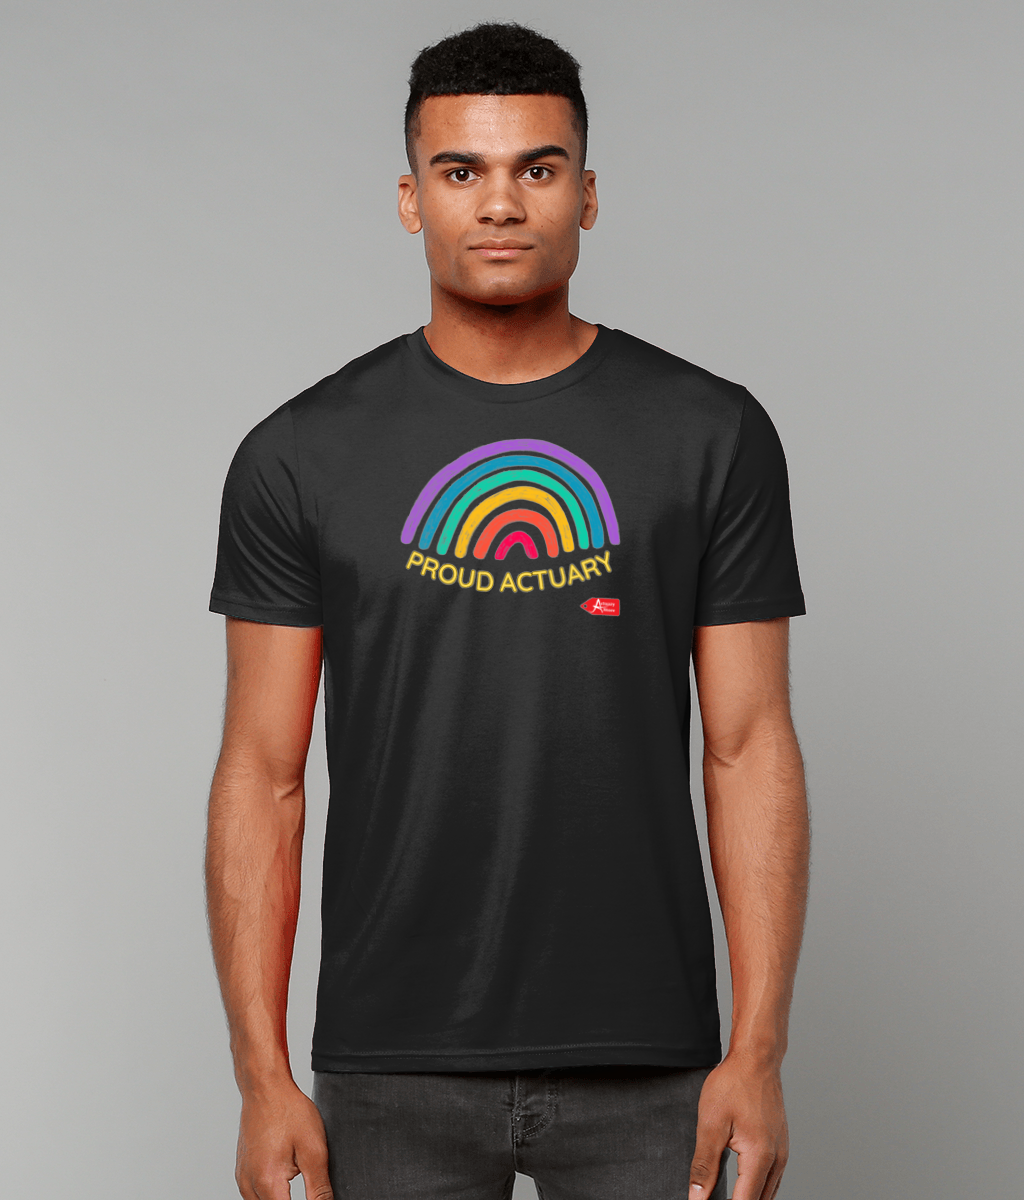 Proud Actuary Rainbow T-Shirt (Black and White Variants)